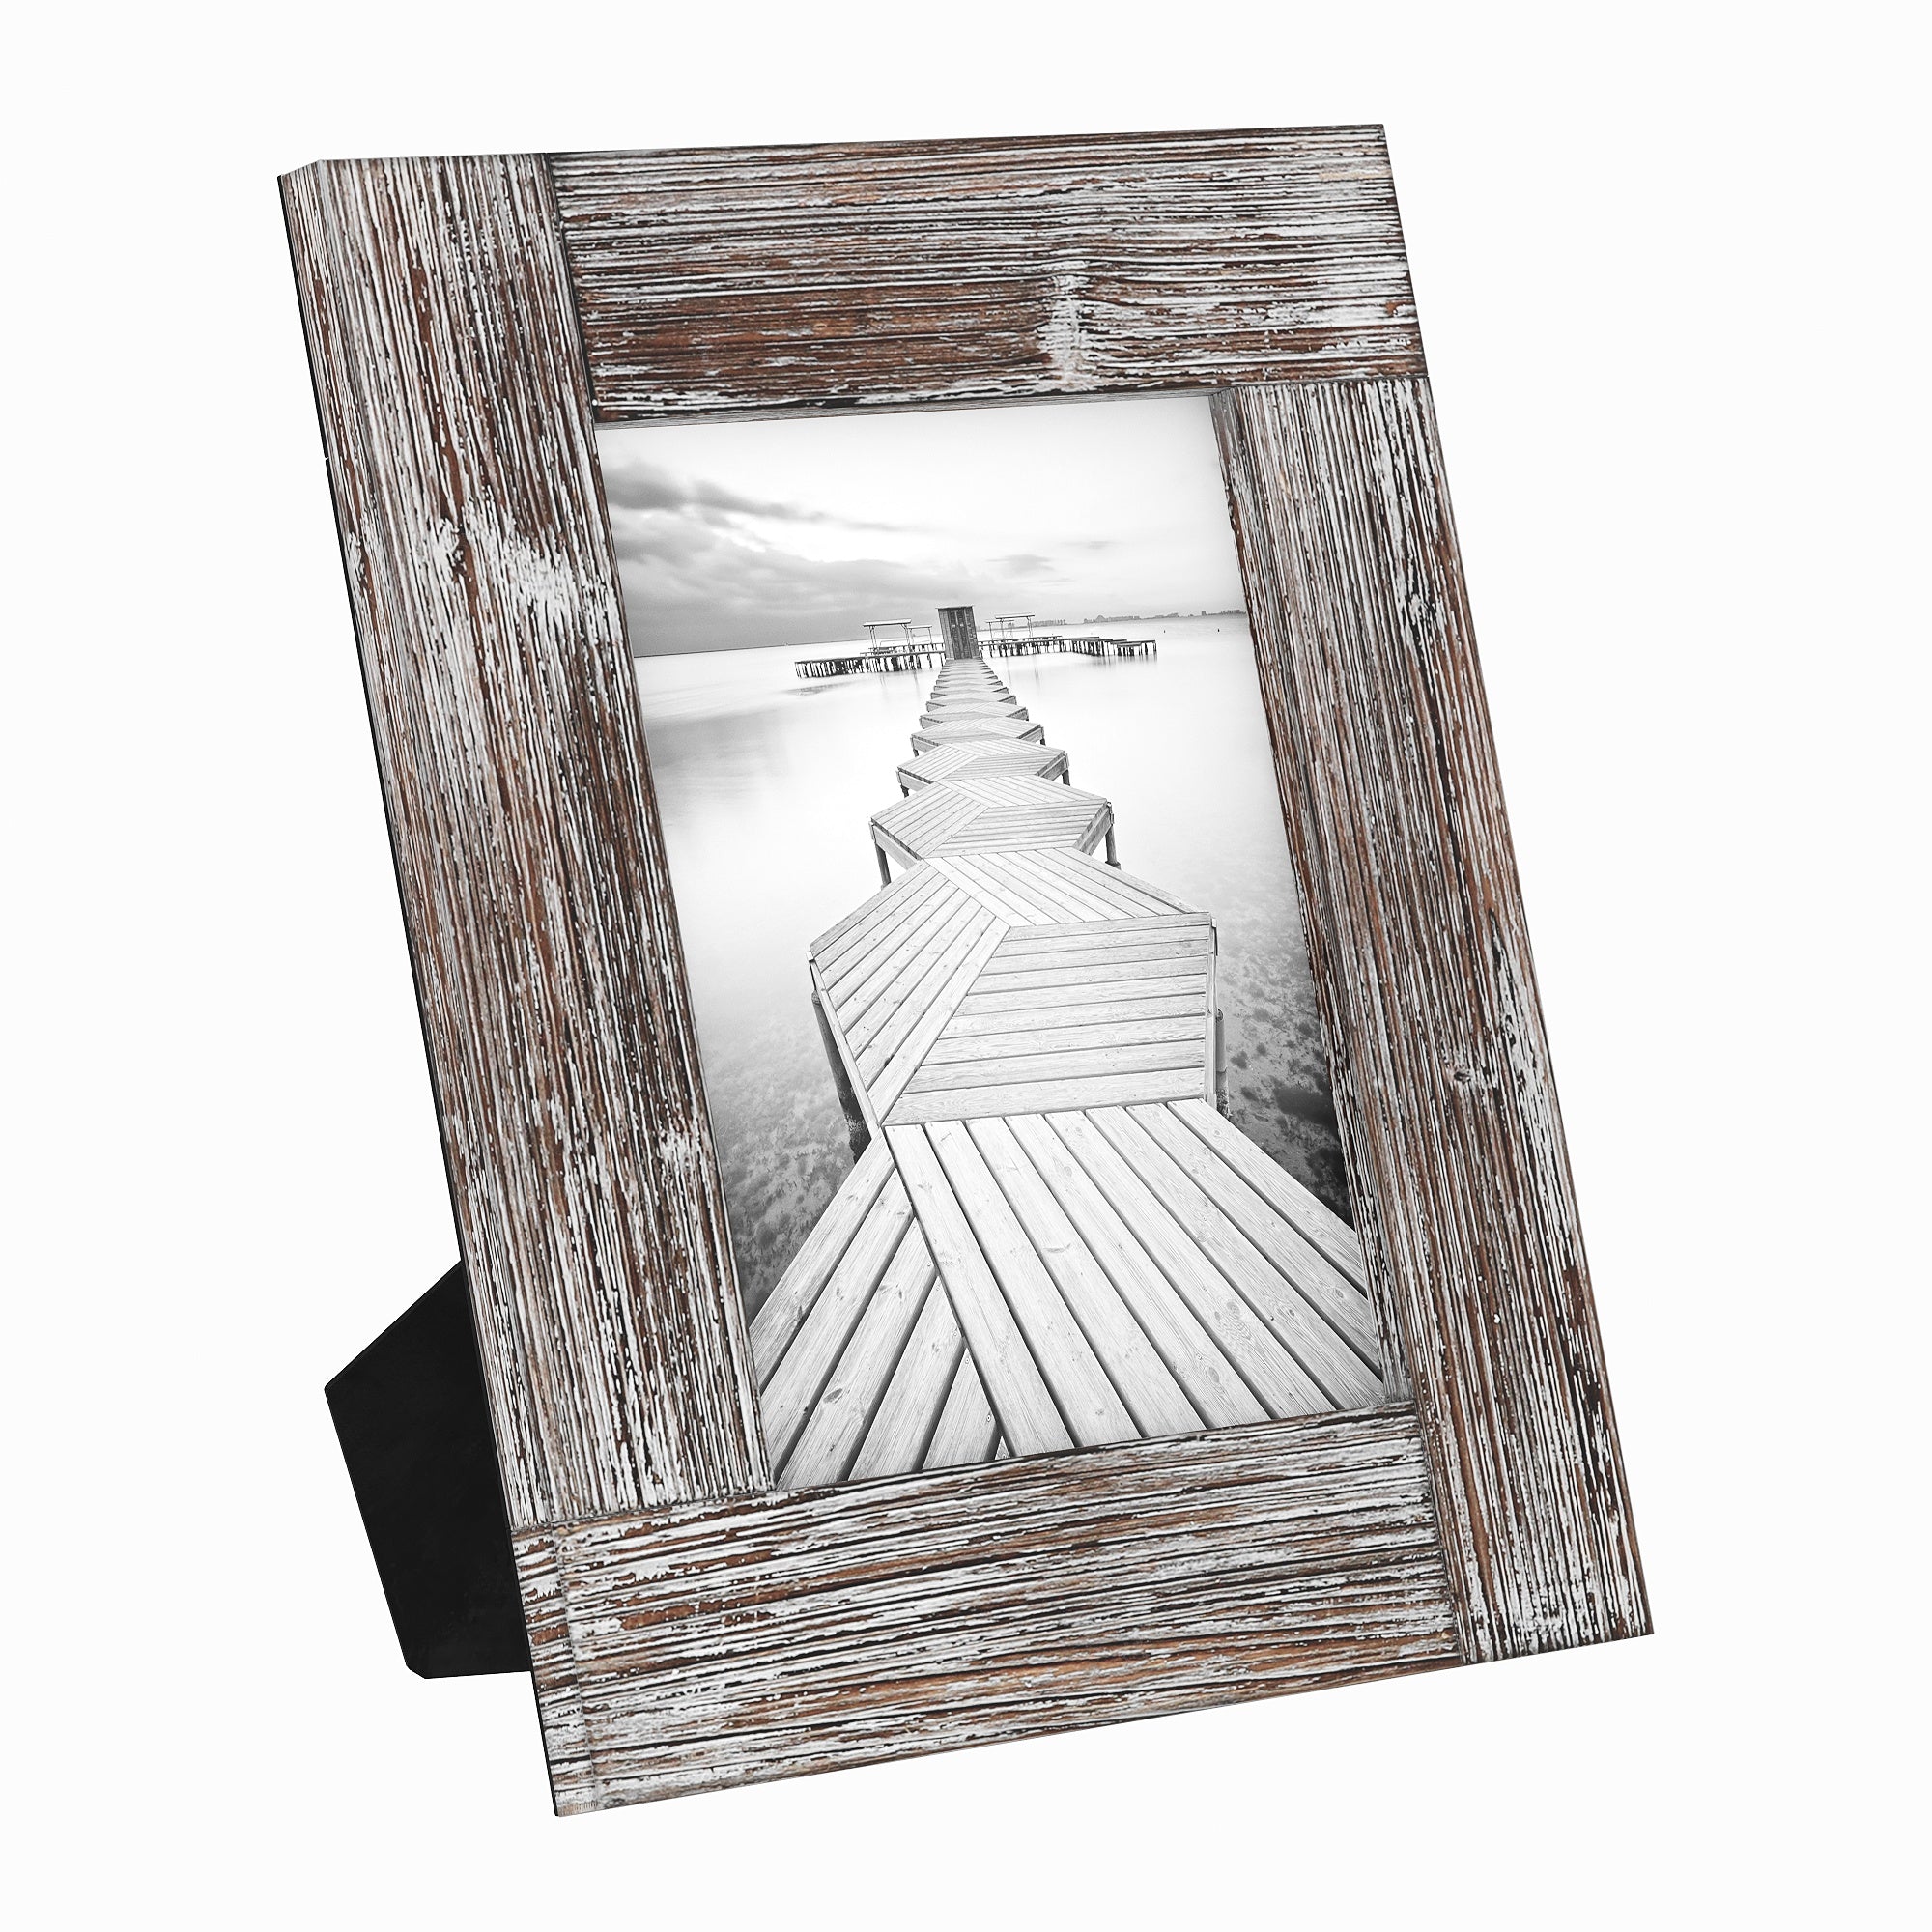 Sonefreiy 5x7 Picture Frame, Rustic Picture Frames for Wall, 5 x 7 Photo  Frame Barn Wood Molding Tabletop Display, Gift for Family Mom Dad Grandma